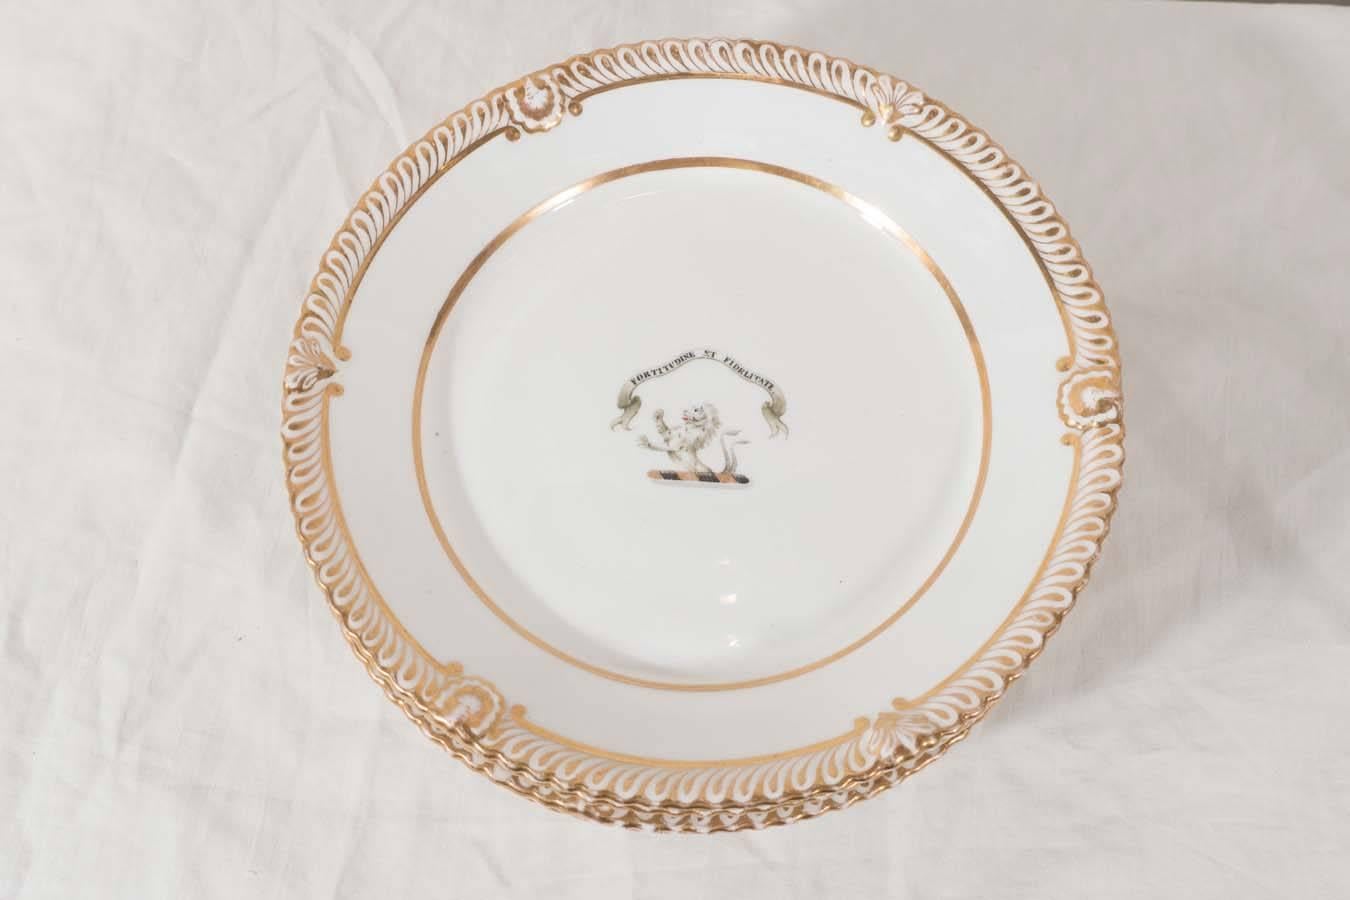 Early 19th Century A Pair of Armorial Porcelain Plates in White and Gold